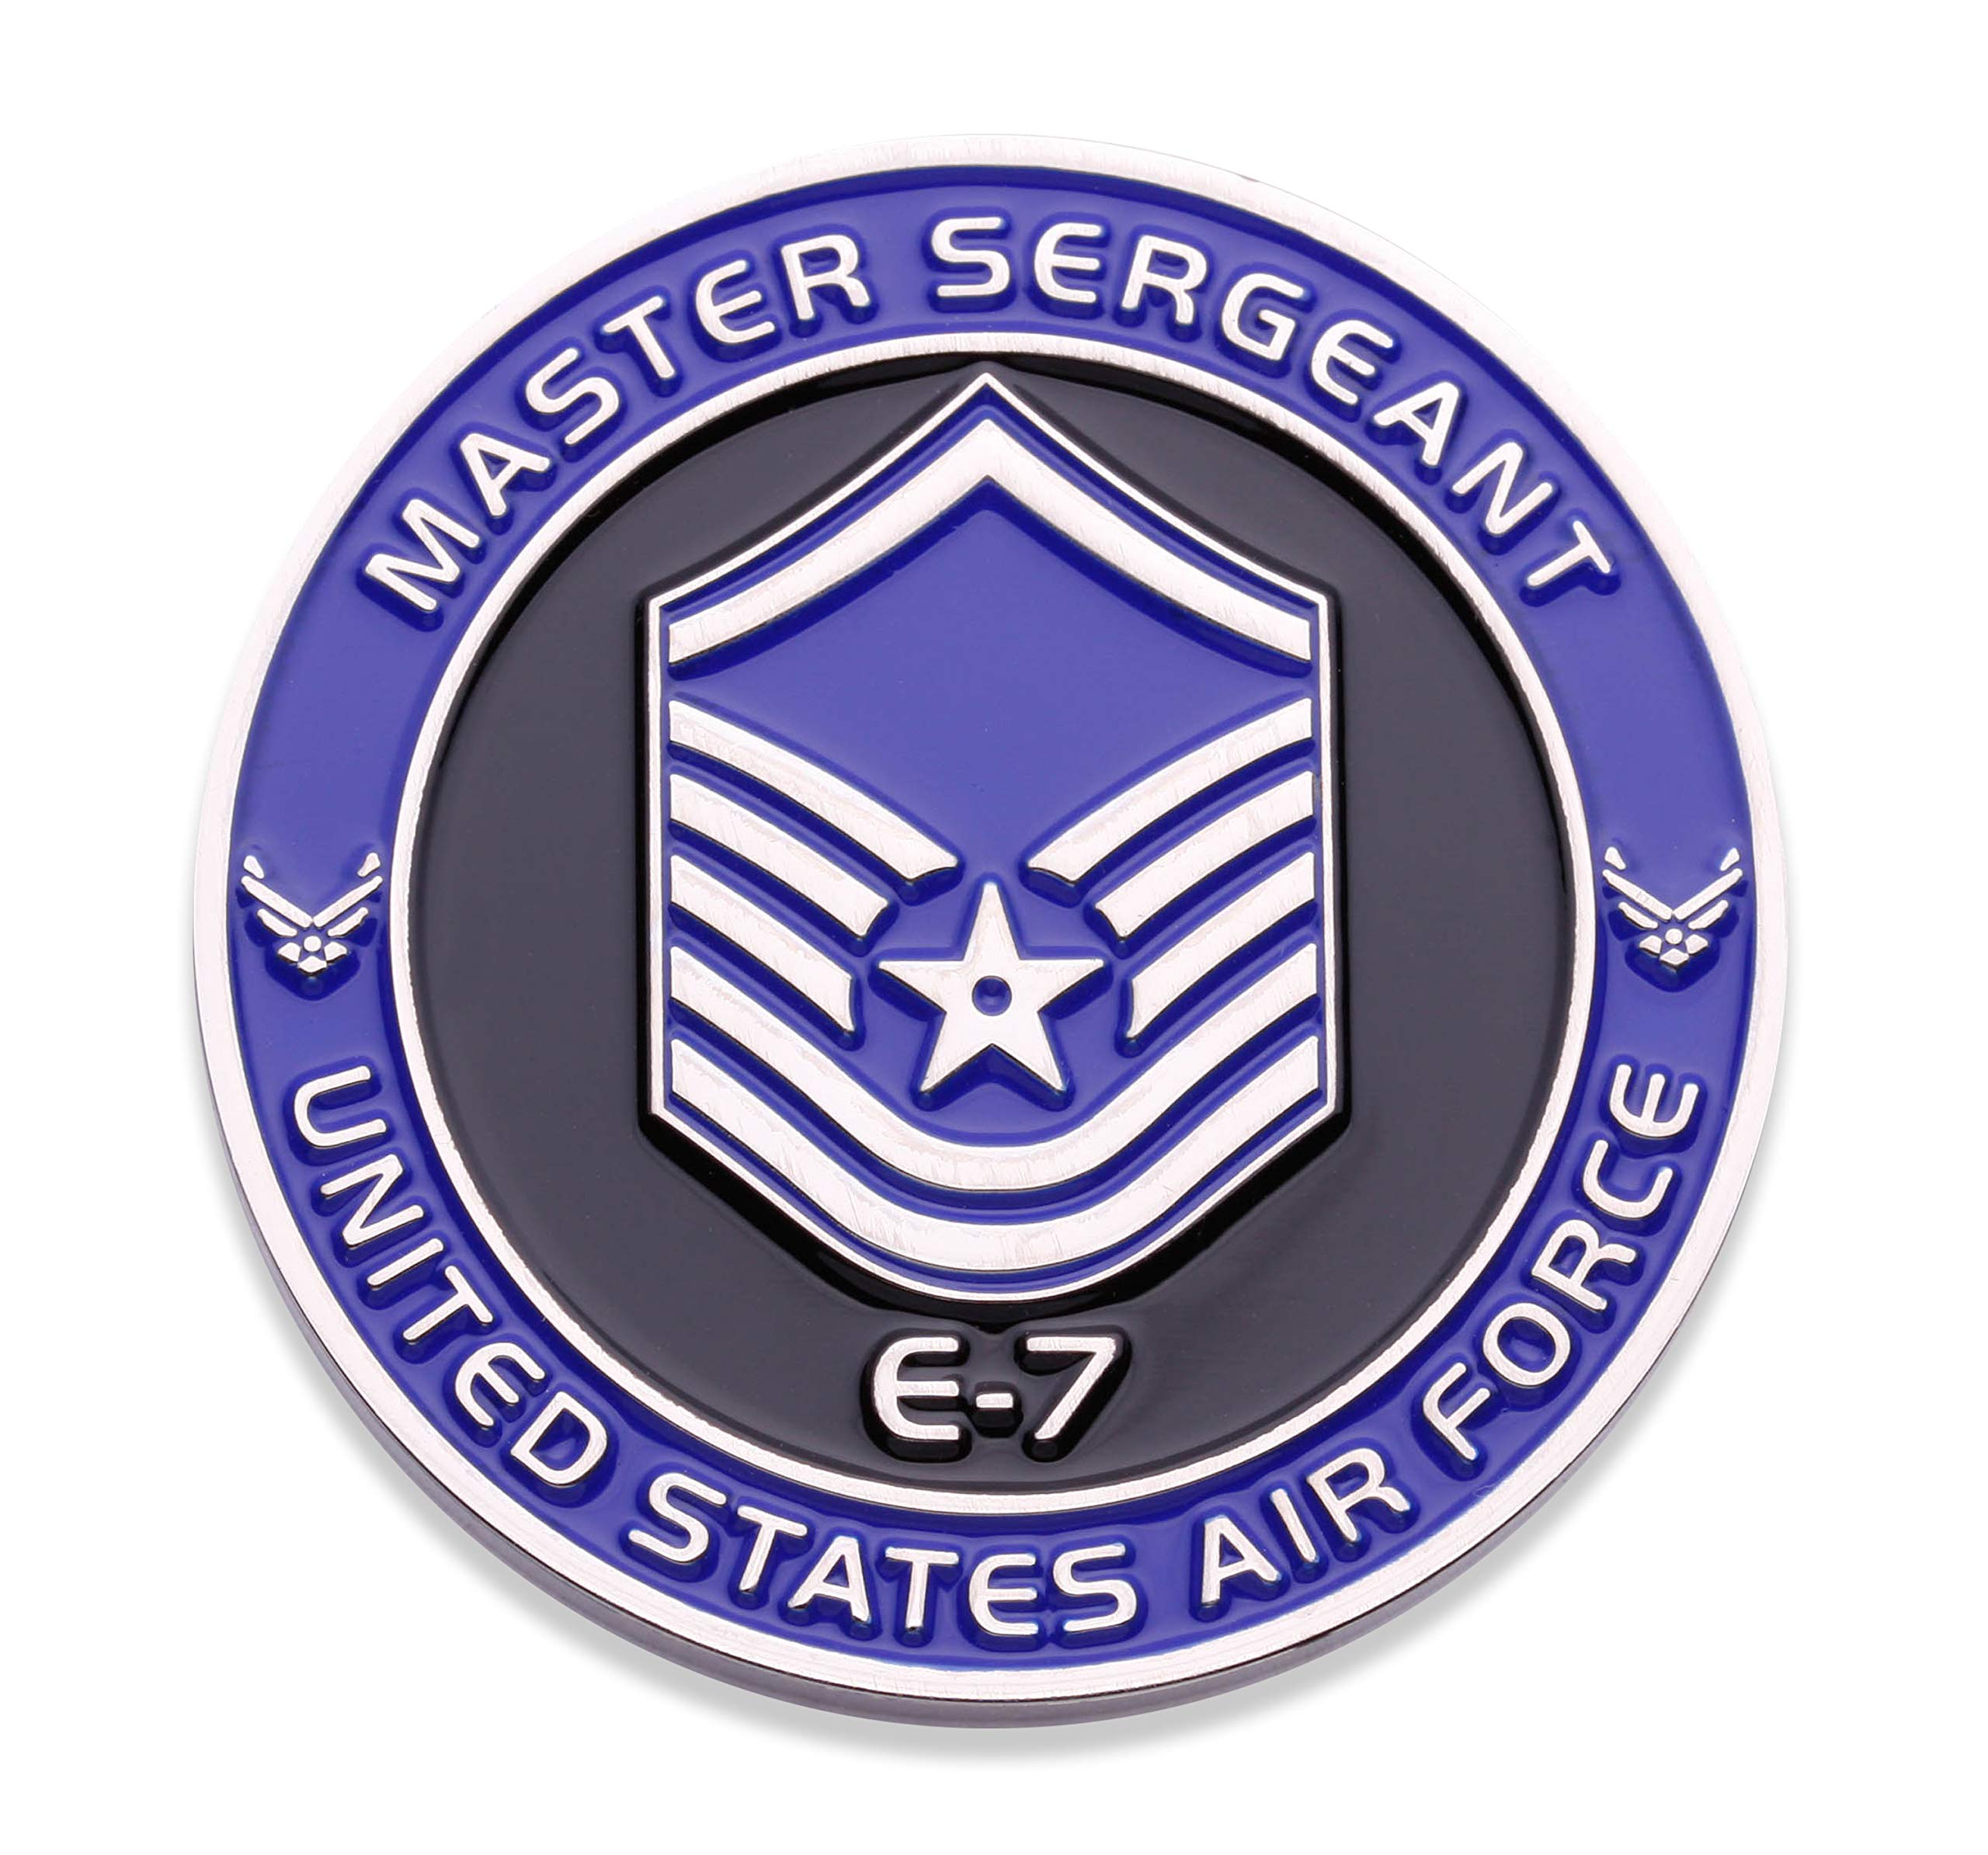 Air Force Master Sergeant E7 Challenge Coin! United States Air Force Master Sergeant Rank Military Coin MSGT. E-7 USAF Challenge Coin! Designed by Military Veterans - Officially Licensed Product!